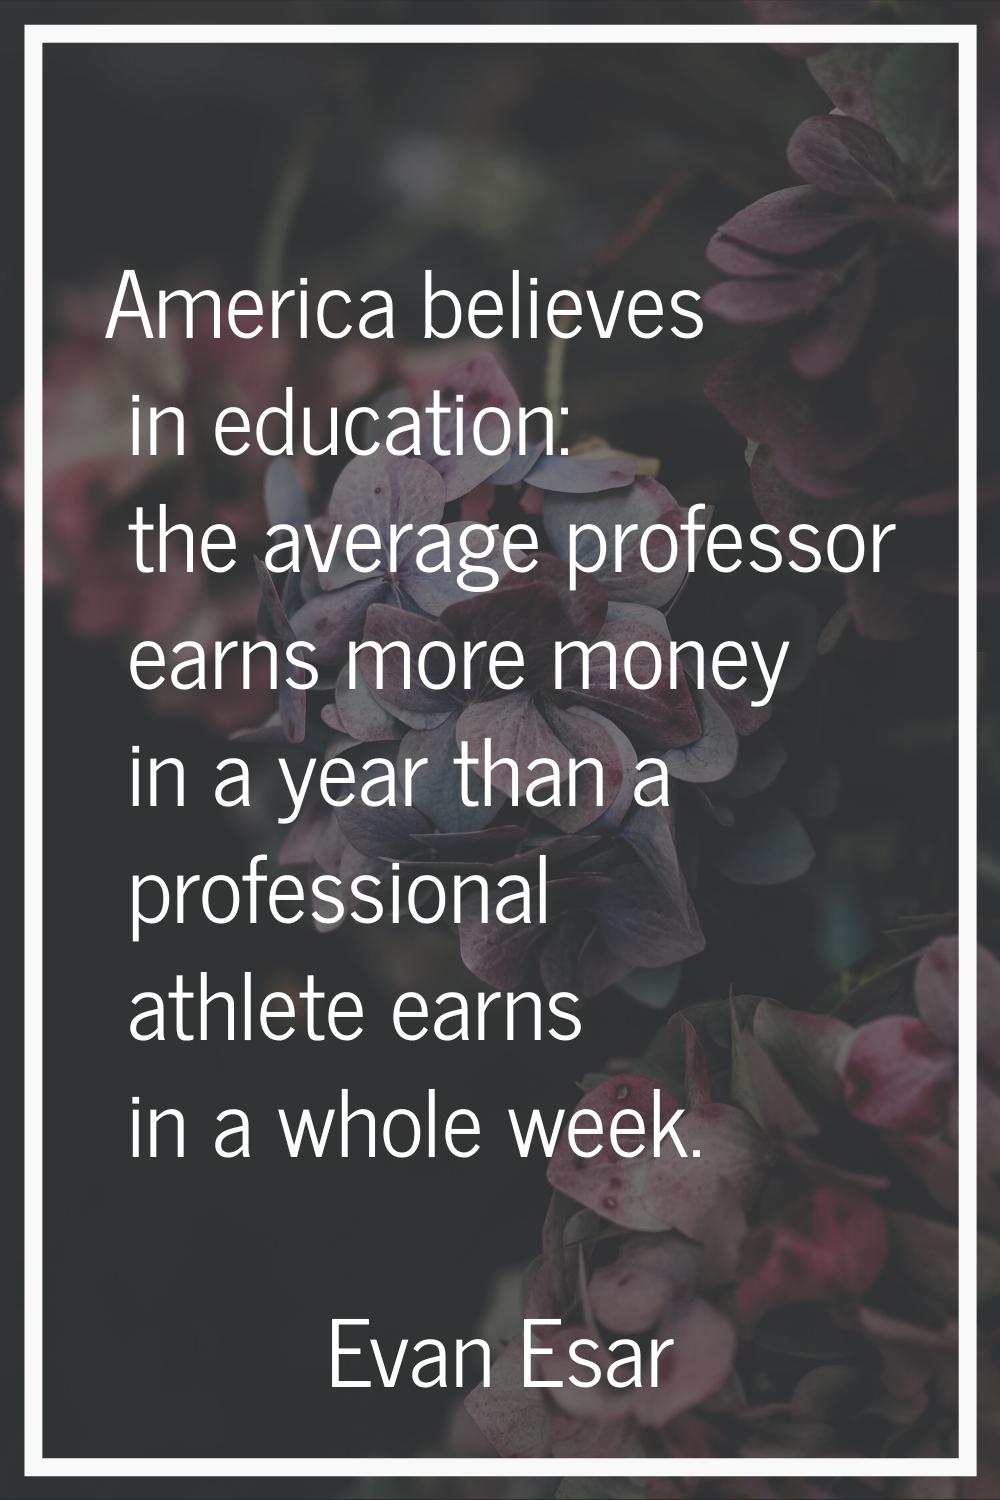 America believes in education: the average professor earns more money in a year than a professional